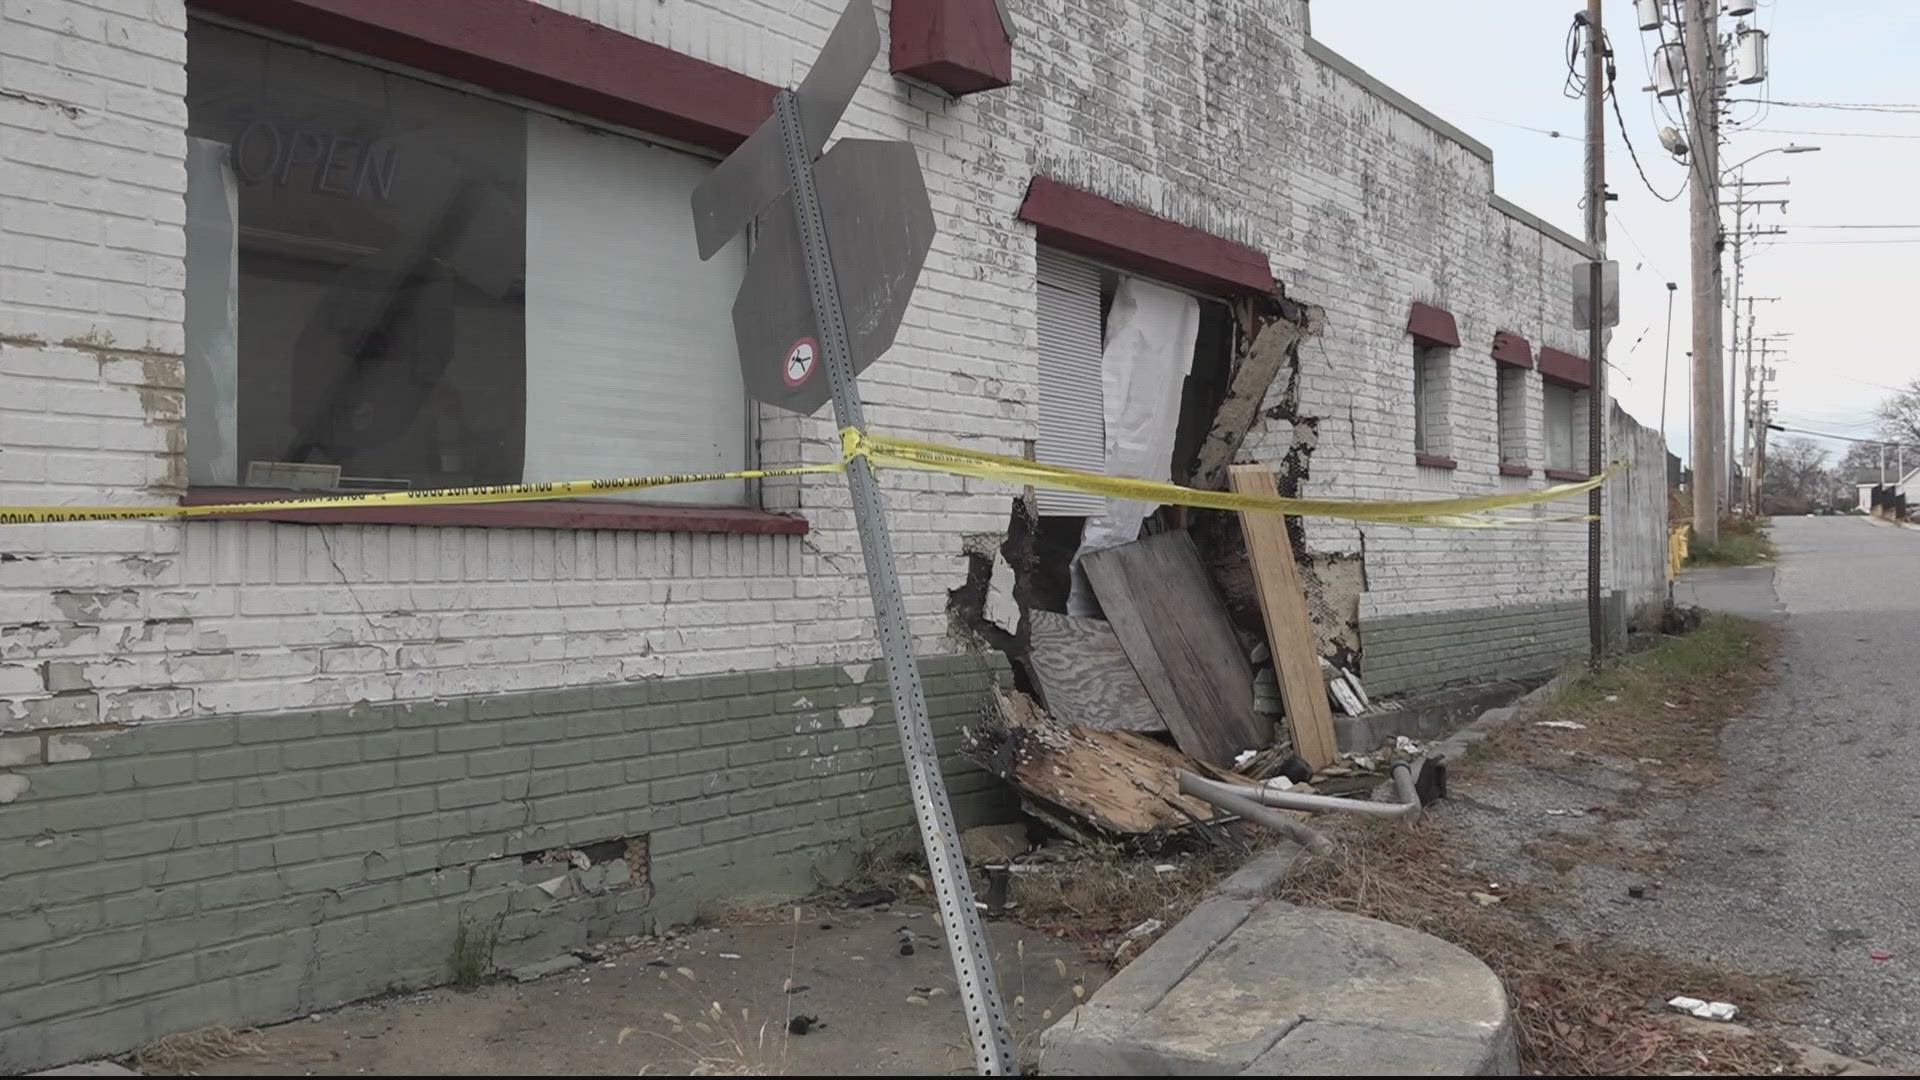 A car slammed into Laurel Tavern Donuts last week. Now the community is stepping up to help the business rebuild.